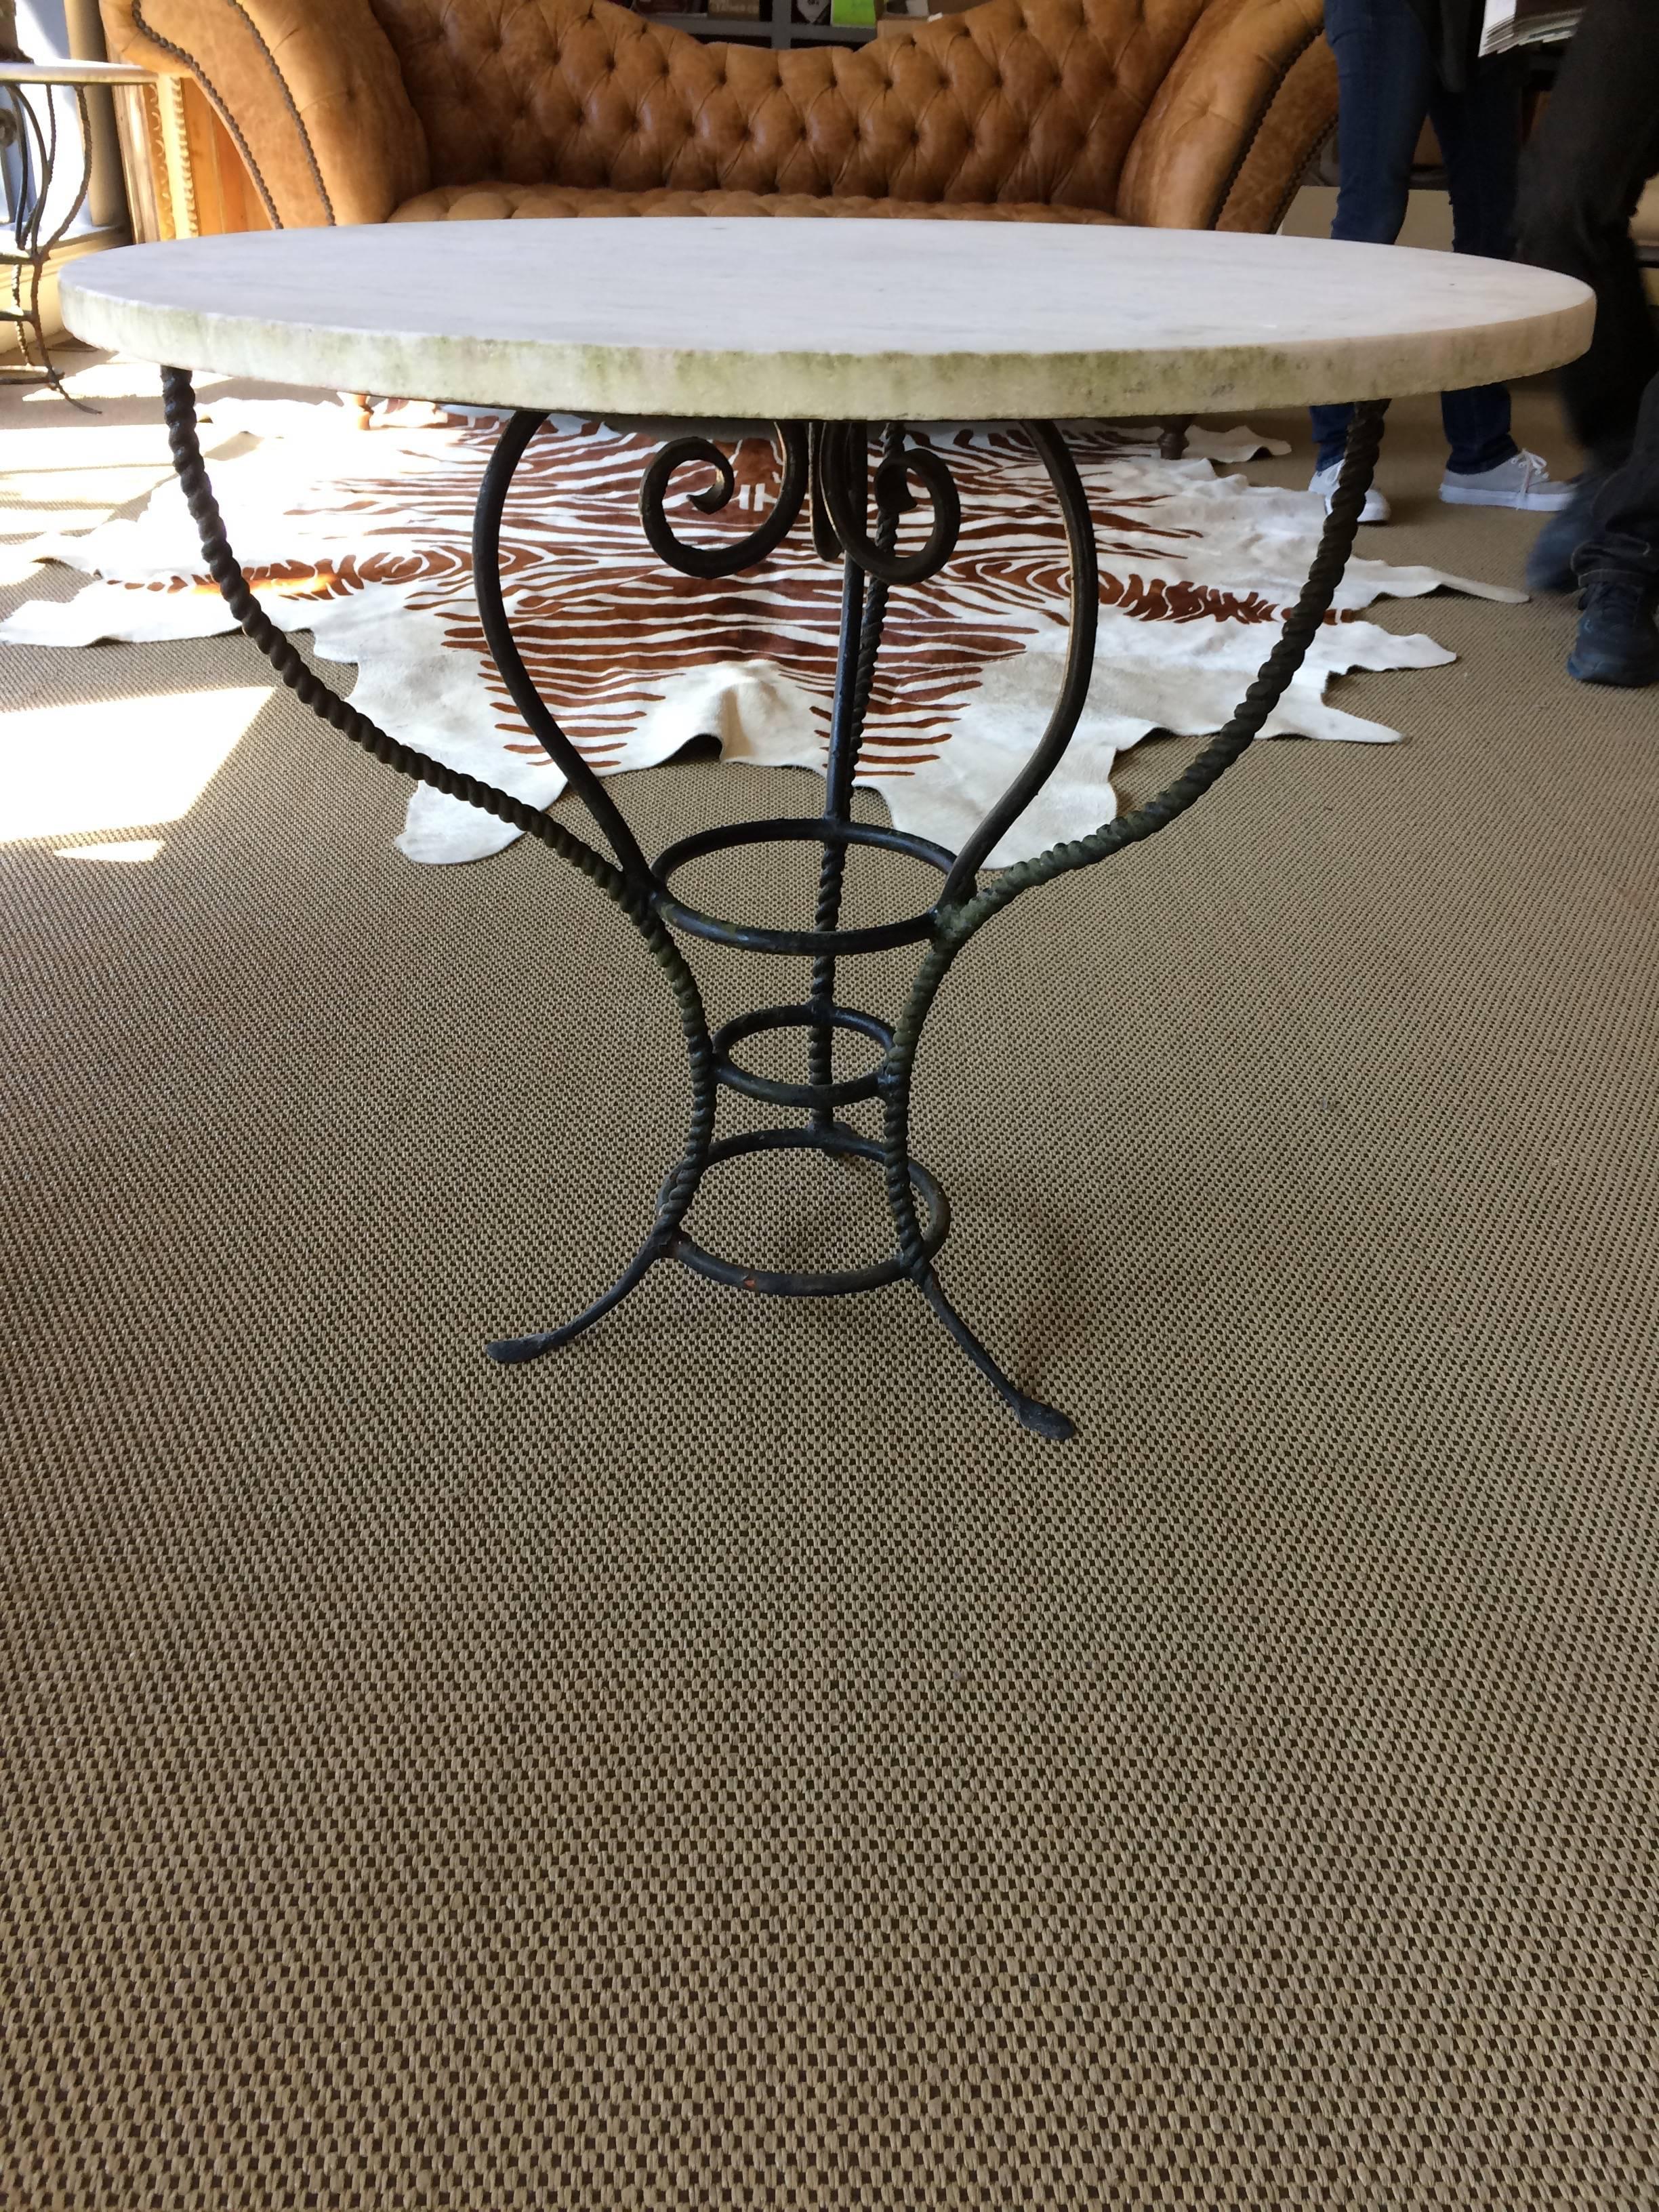 American Great Looking Pair of Iron and Marble Side Tables